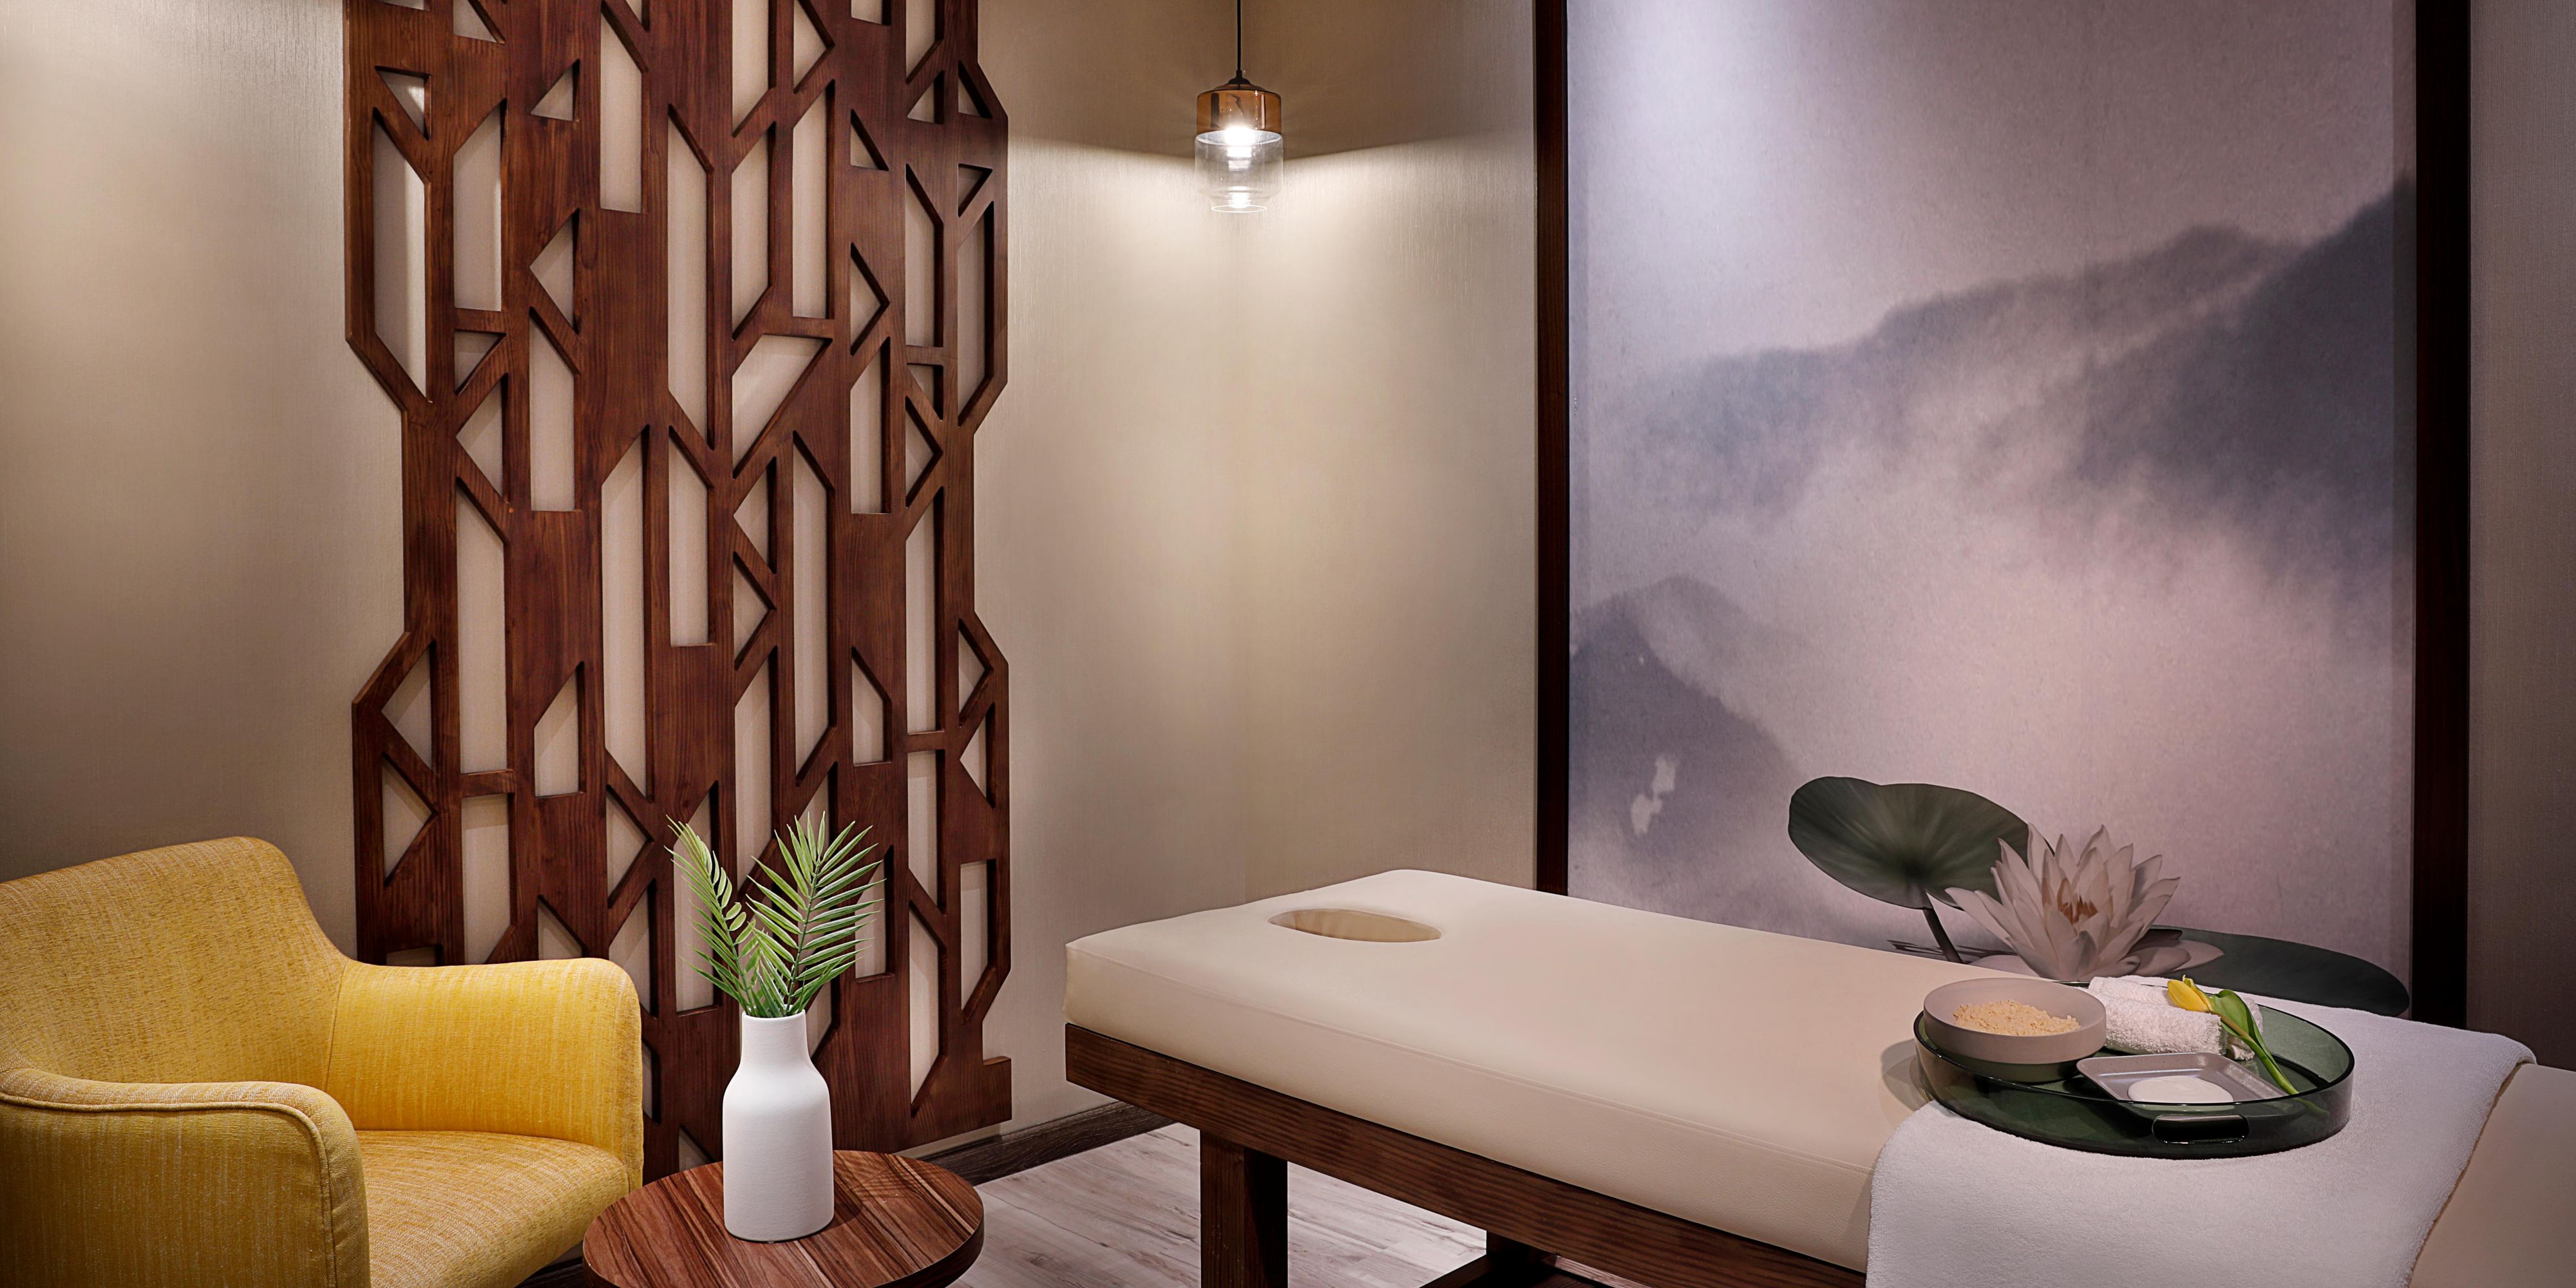 Located on the 6th floor, Soul Wellness and Spa offers a total of 5 treatment rooms. 3 rooms for ladies and 2 for men with completely different entrances. A wide range of treatments suitable for all occasions, from Moroccan and Cleopatra bath to full body massages.